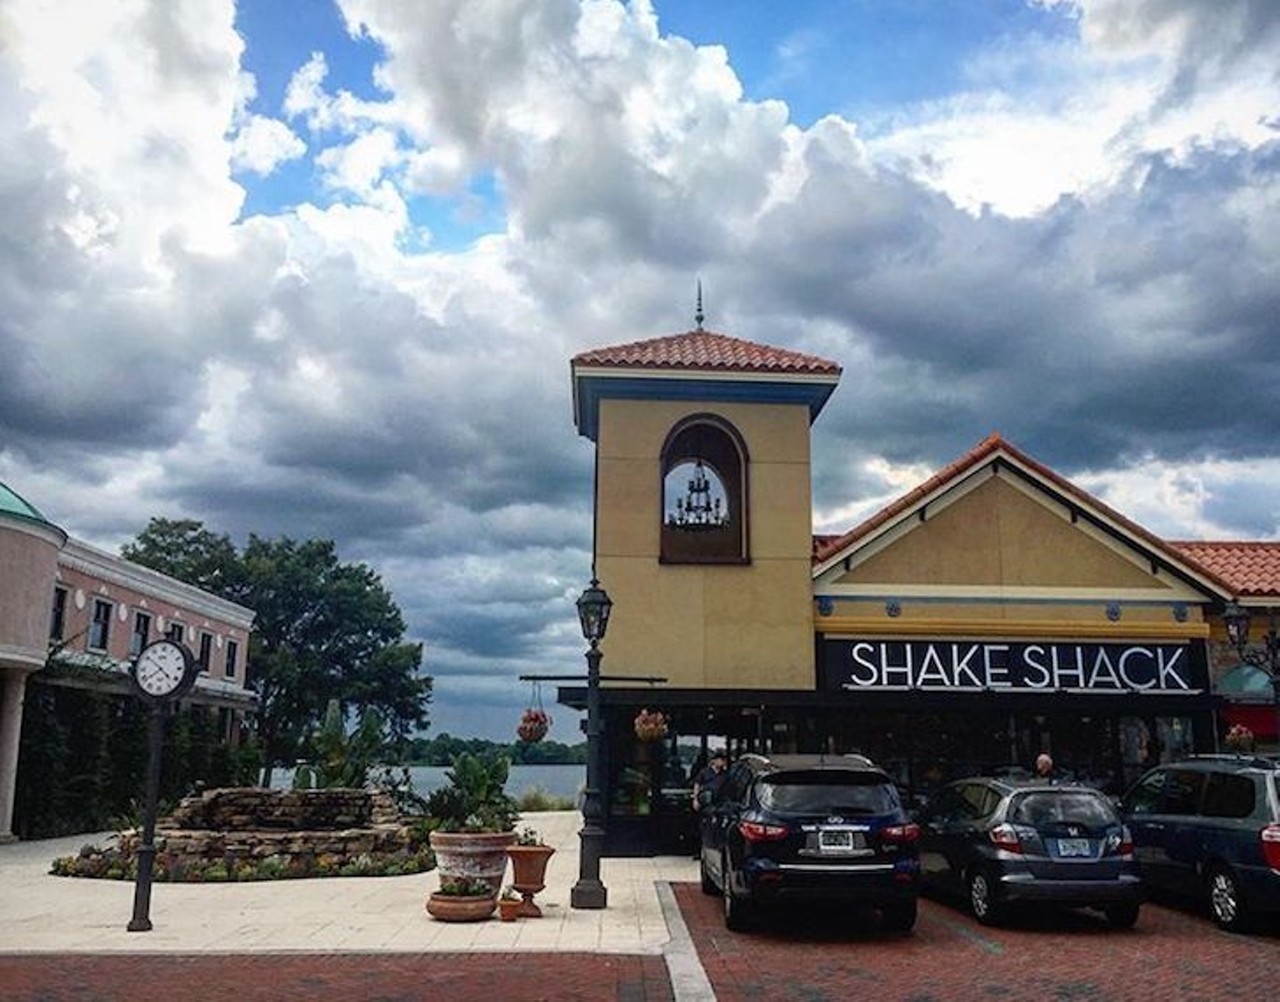 Shake Shack
119 N. Orlando Ave., Winter Park | 321-203-5130
The landscaped patio at Shake Shack in Winter Park overlooks Lake Killarney, and is a sweet place to slurp a Fair Shake coffee treat and eat a drippy, delicious burger. Who doesn&#146;t love some fresh french fries and a creamy milkshake to go along with them?
Photo via naplesjay/Instagram